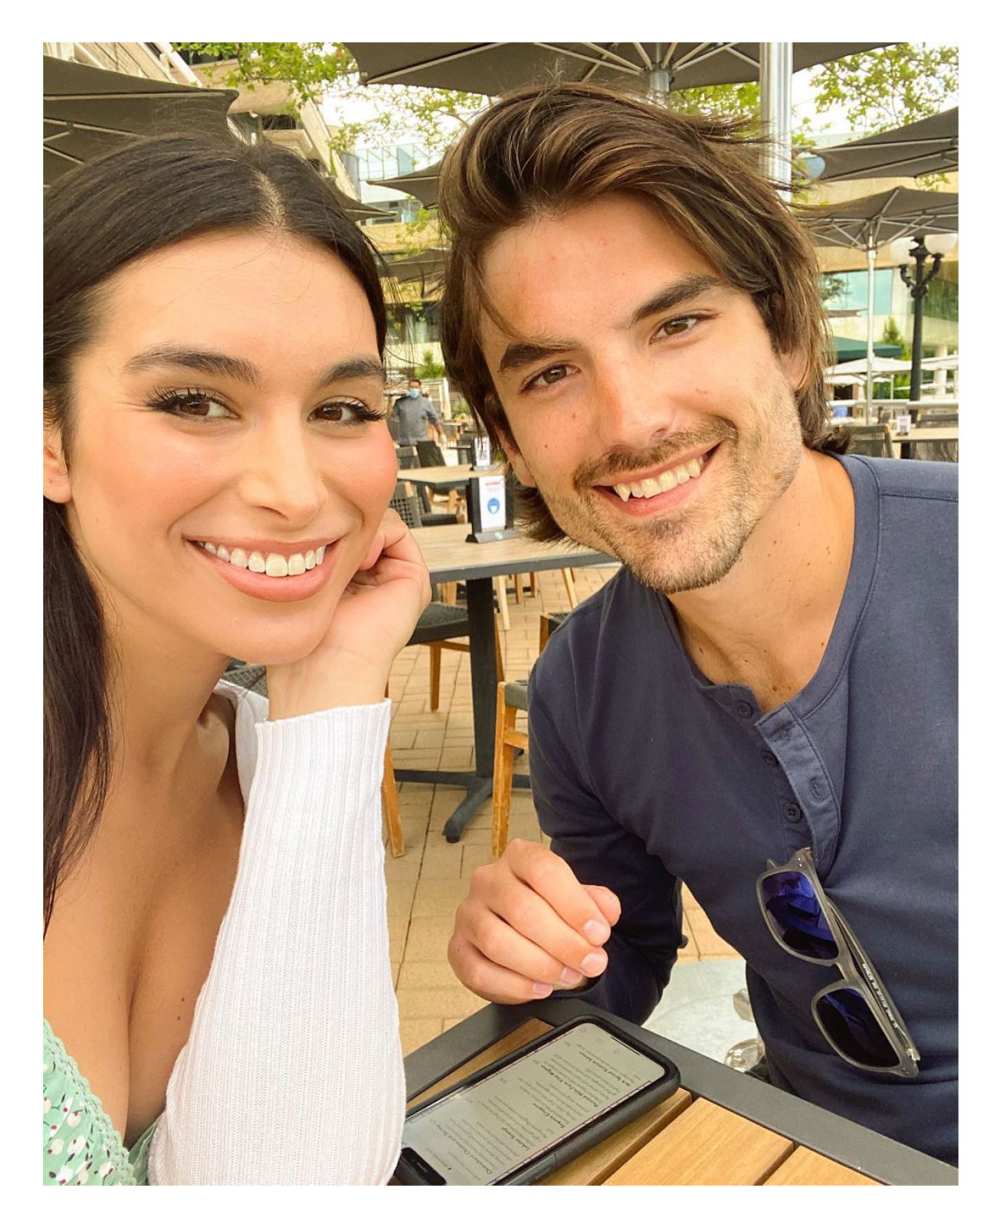 Ashley Iaconetti Reveals She and Jared Haibon Will Start Trying to Get Pregnant in September Instagram